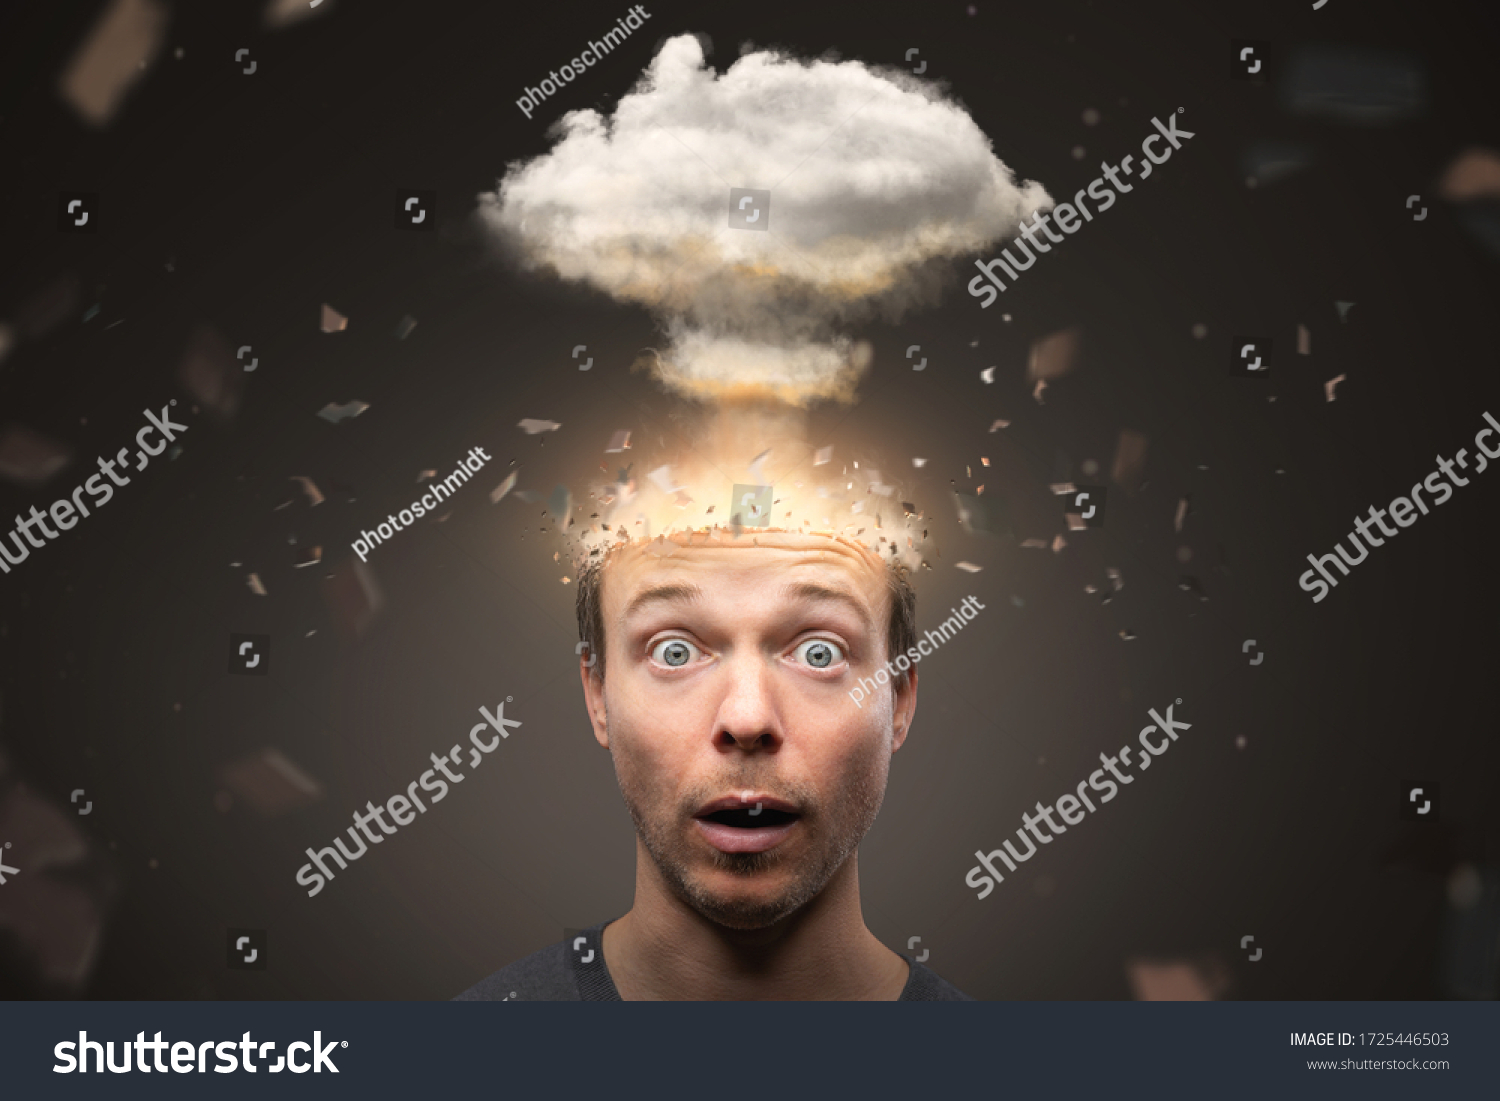 Portrait of a man with an exploding mind #1725446503